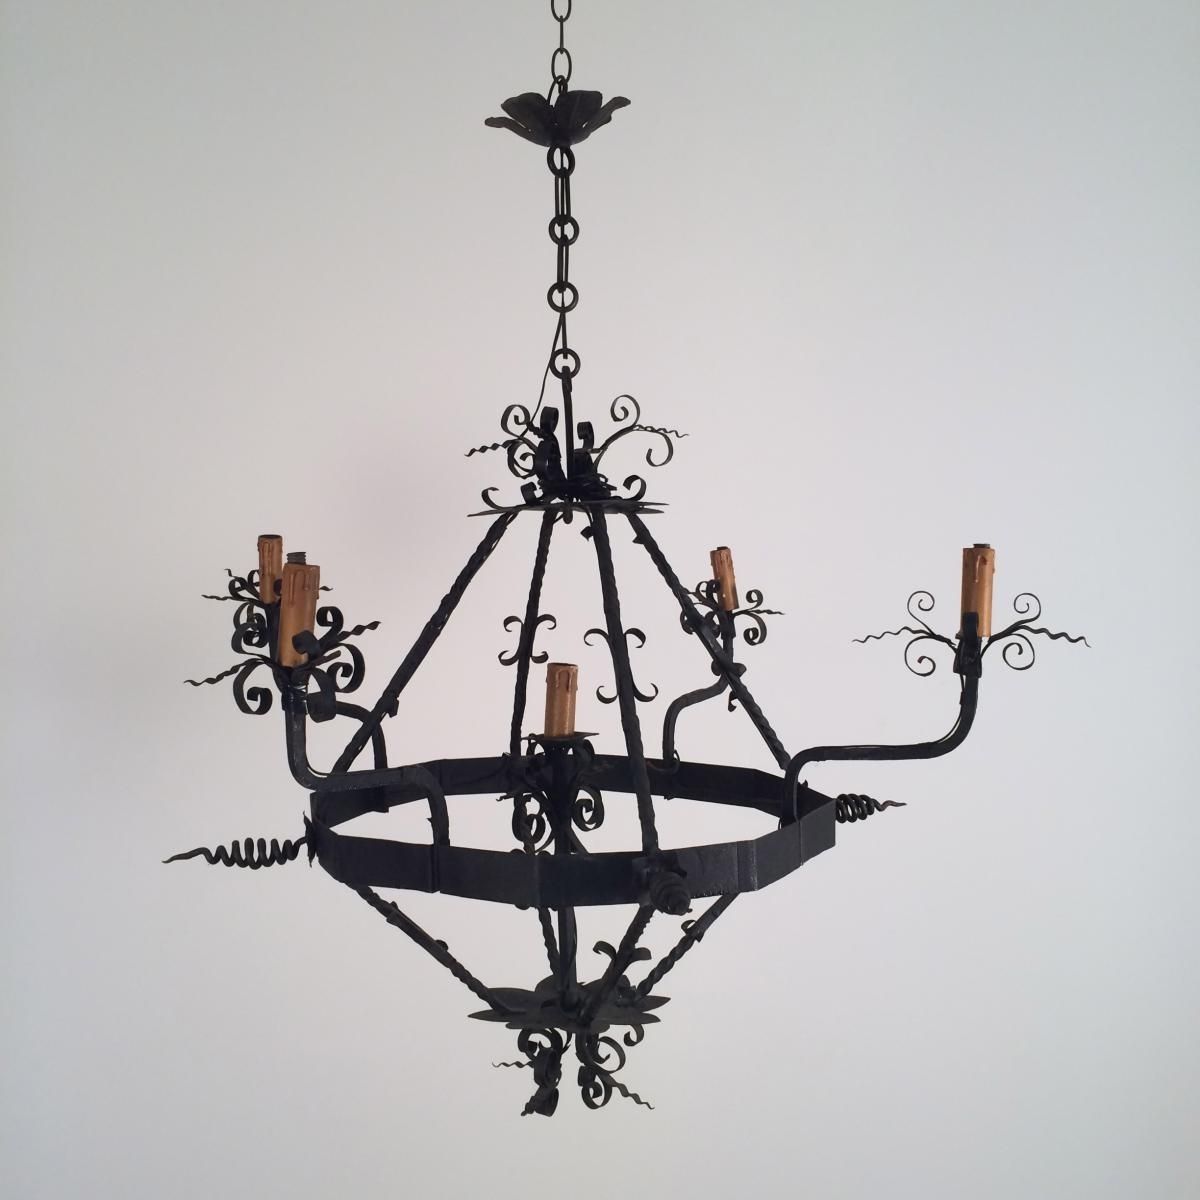 Vintage Wrought Iron Chandelier With Regard To Most Current Vintage Wrought Iron Chandelier, 1960s For Sale At Pamono (View 16 of 20)